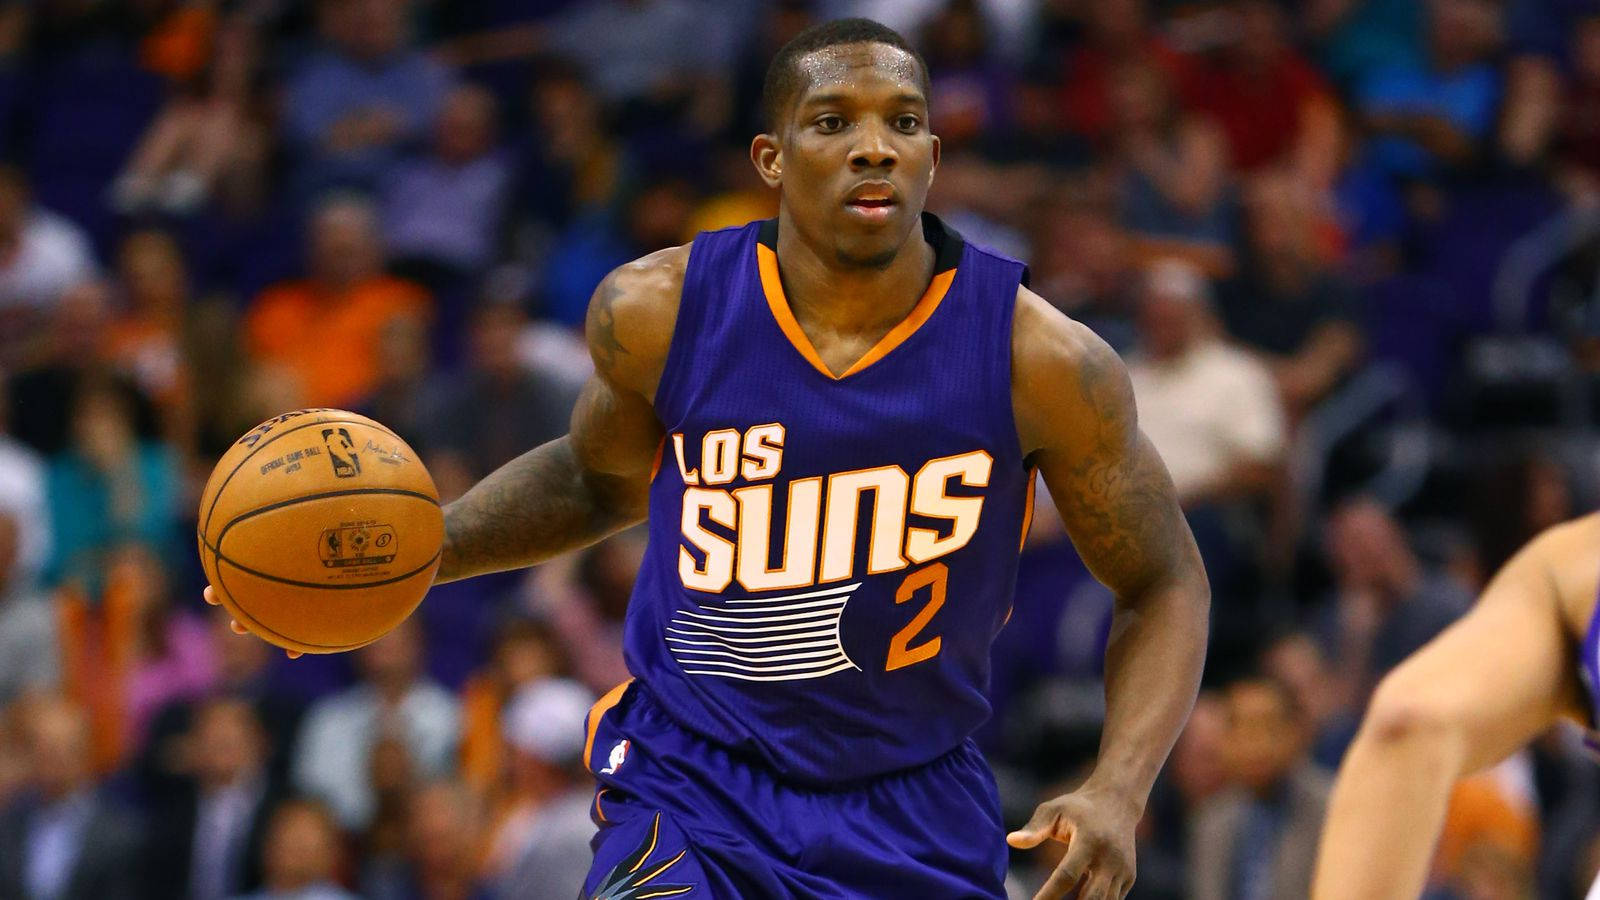 Professional Nba Player Eric Bledsoe Planning A Strategy During A Game.